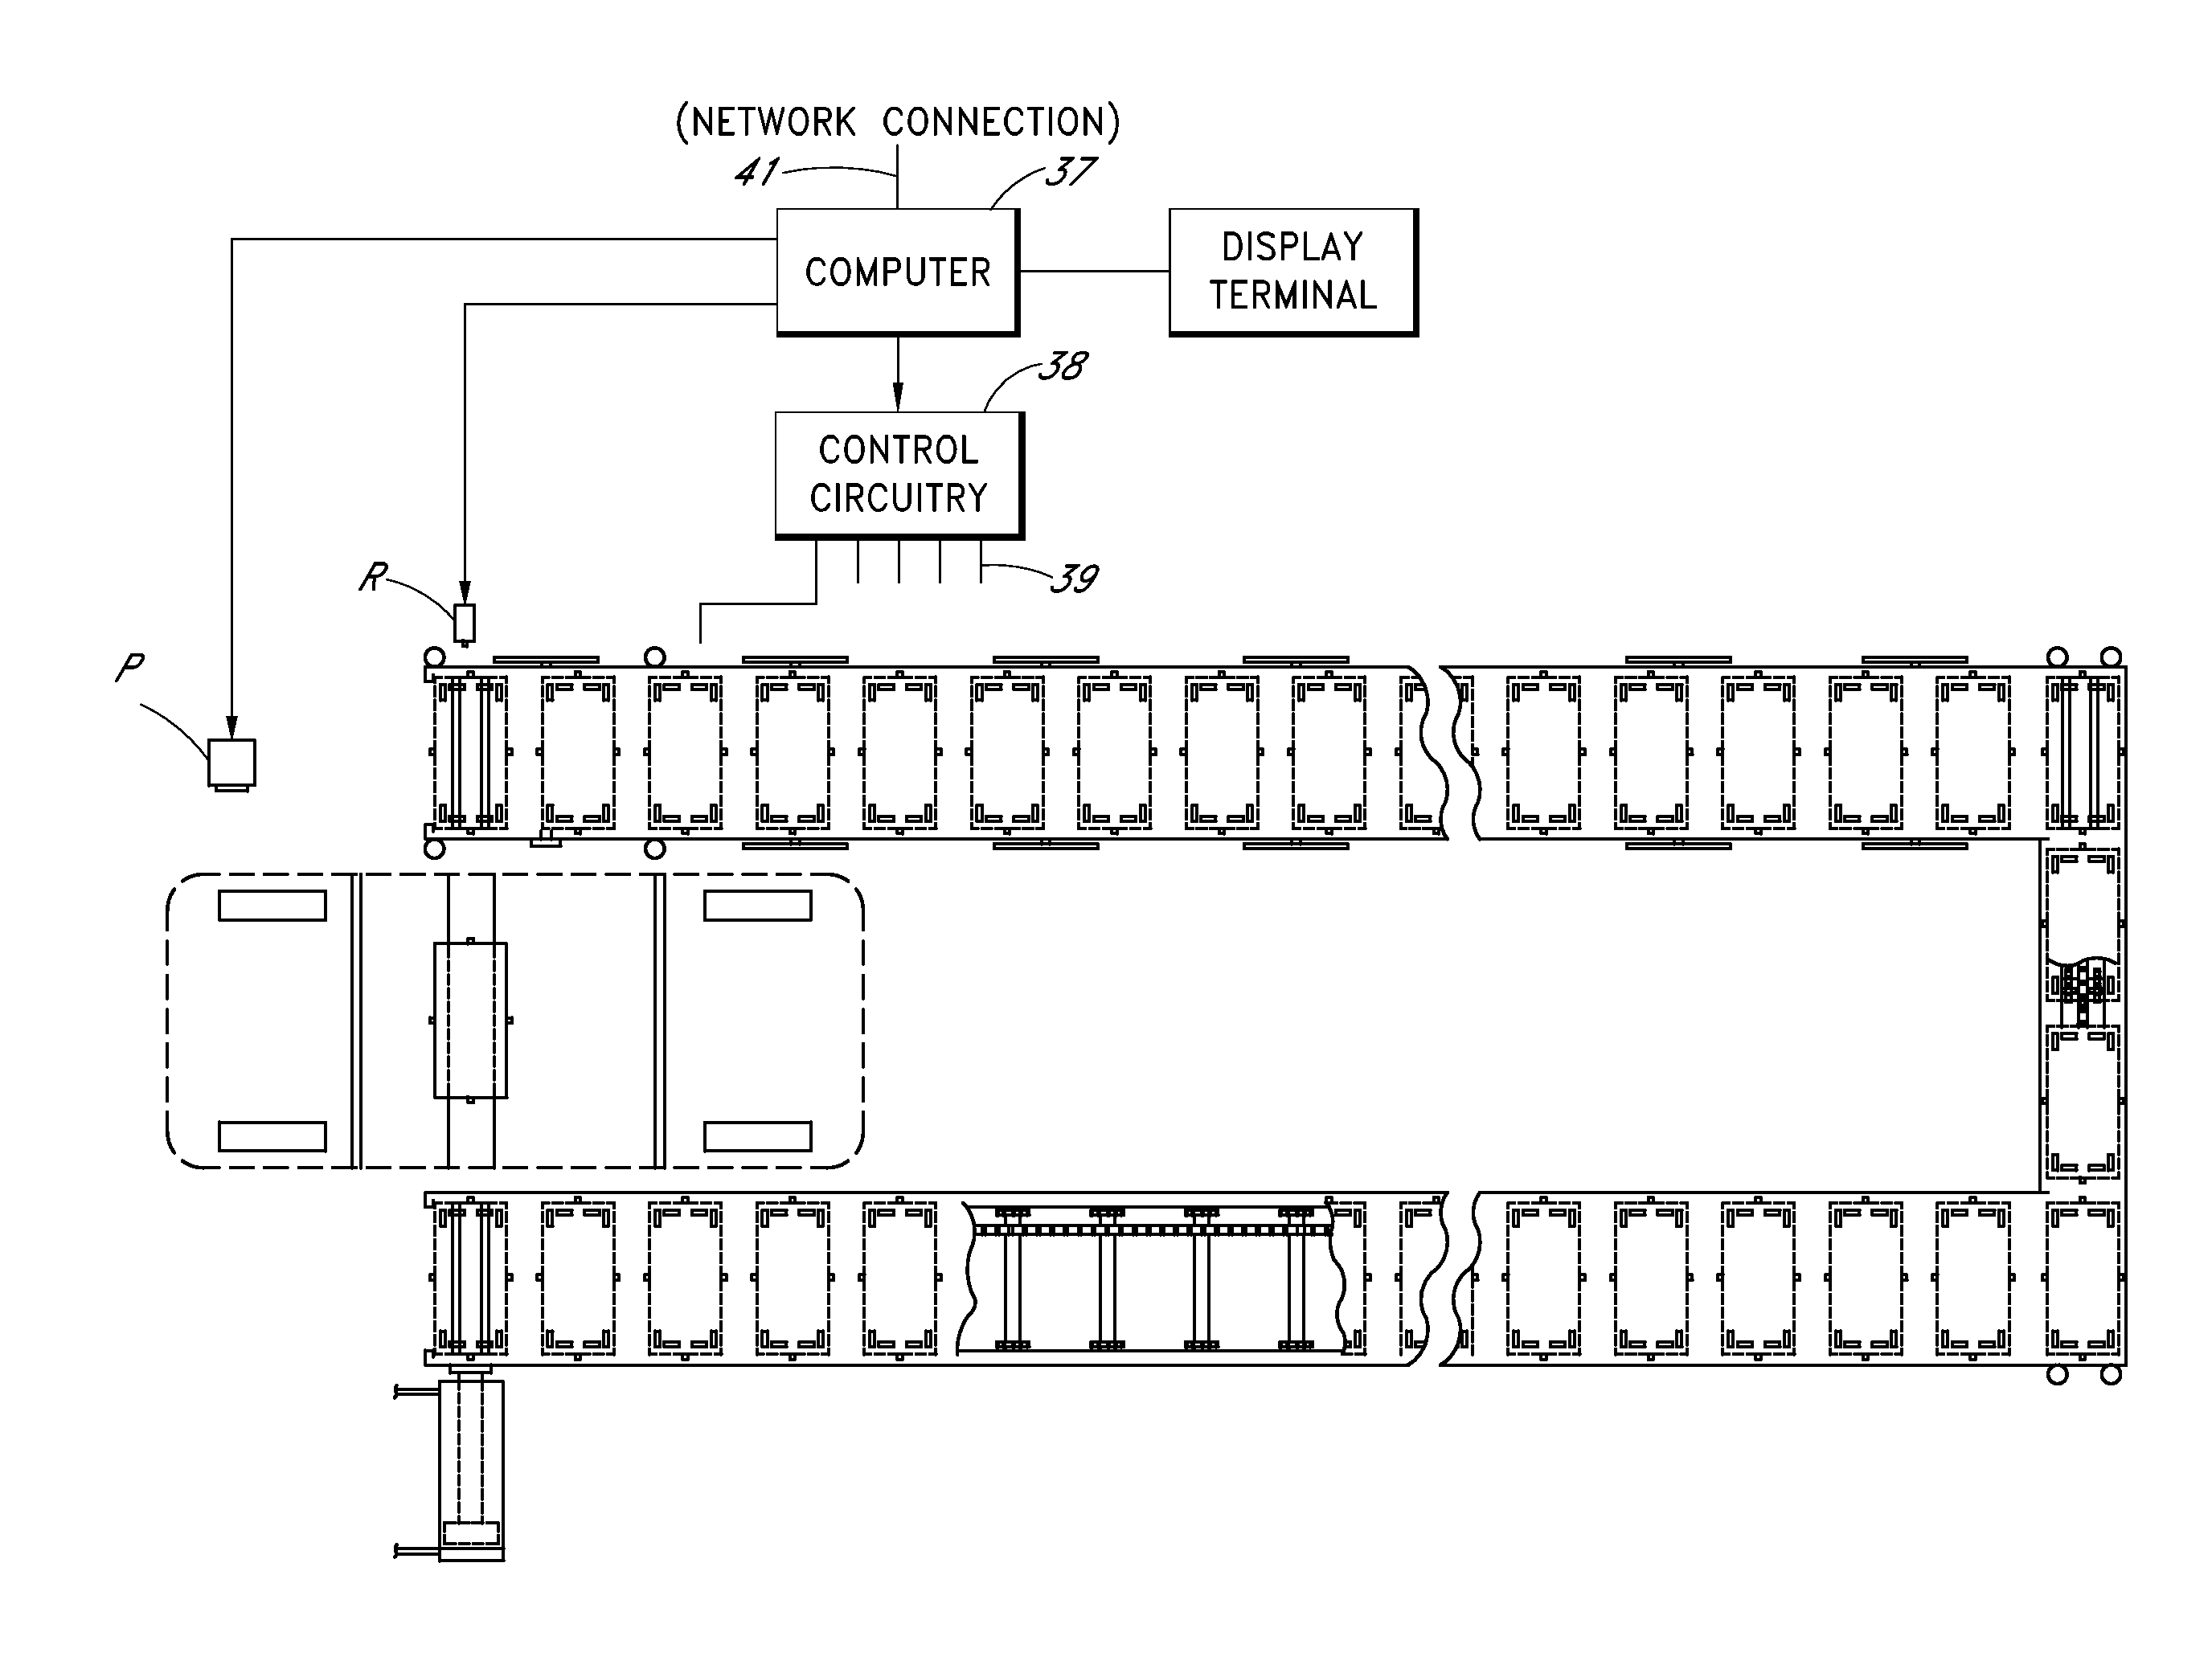 Battery charging and transfer system for electrically powered vehicles